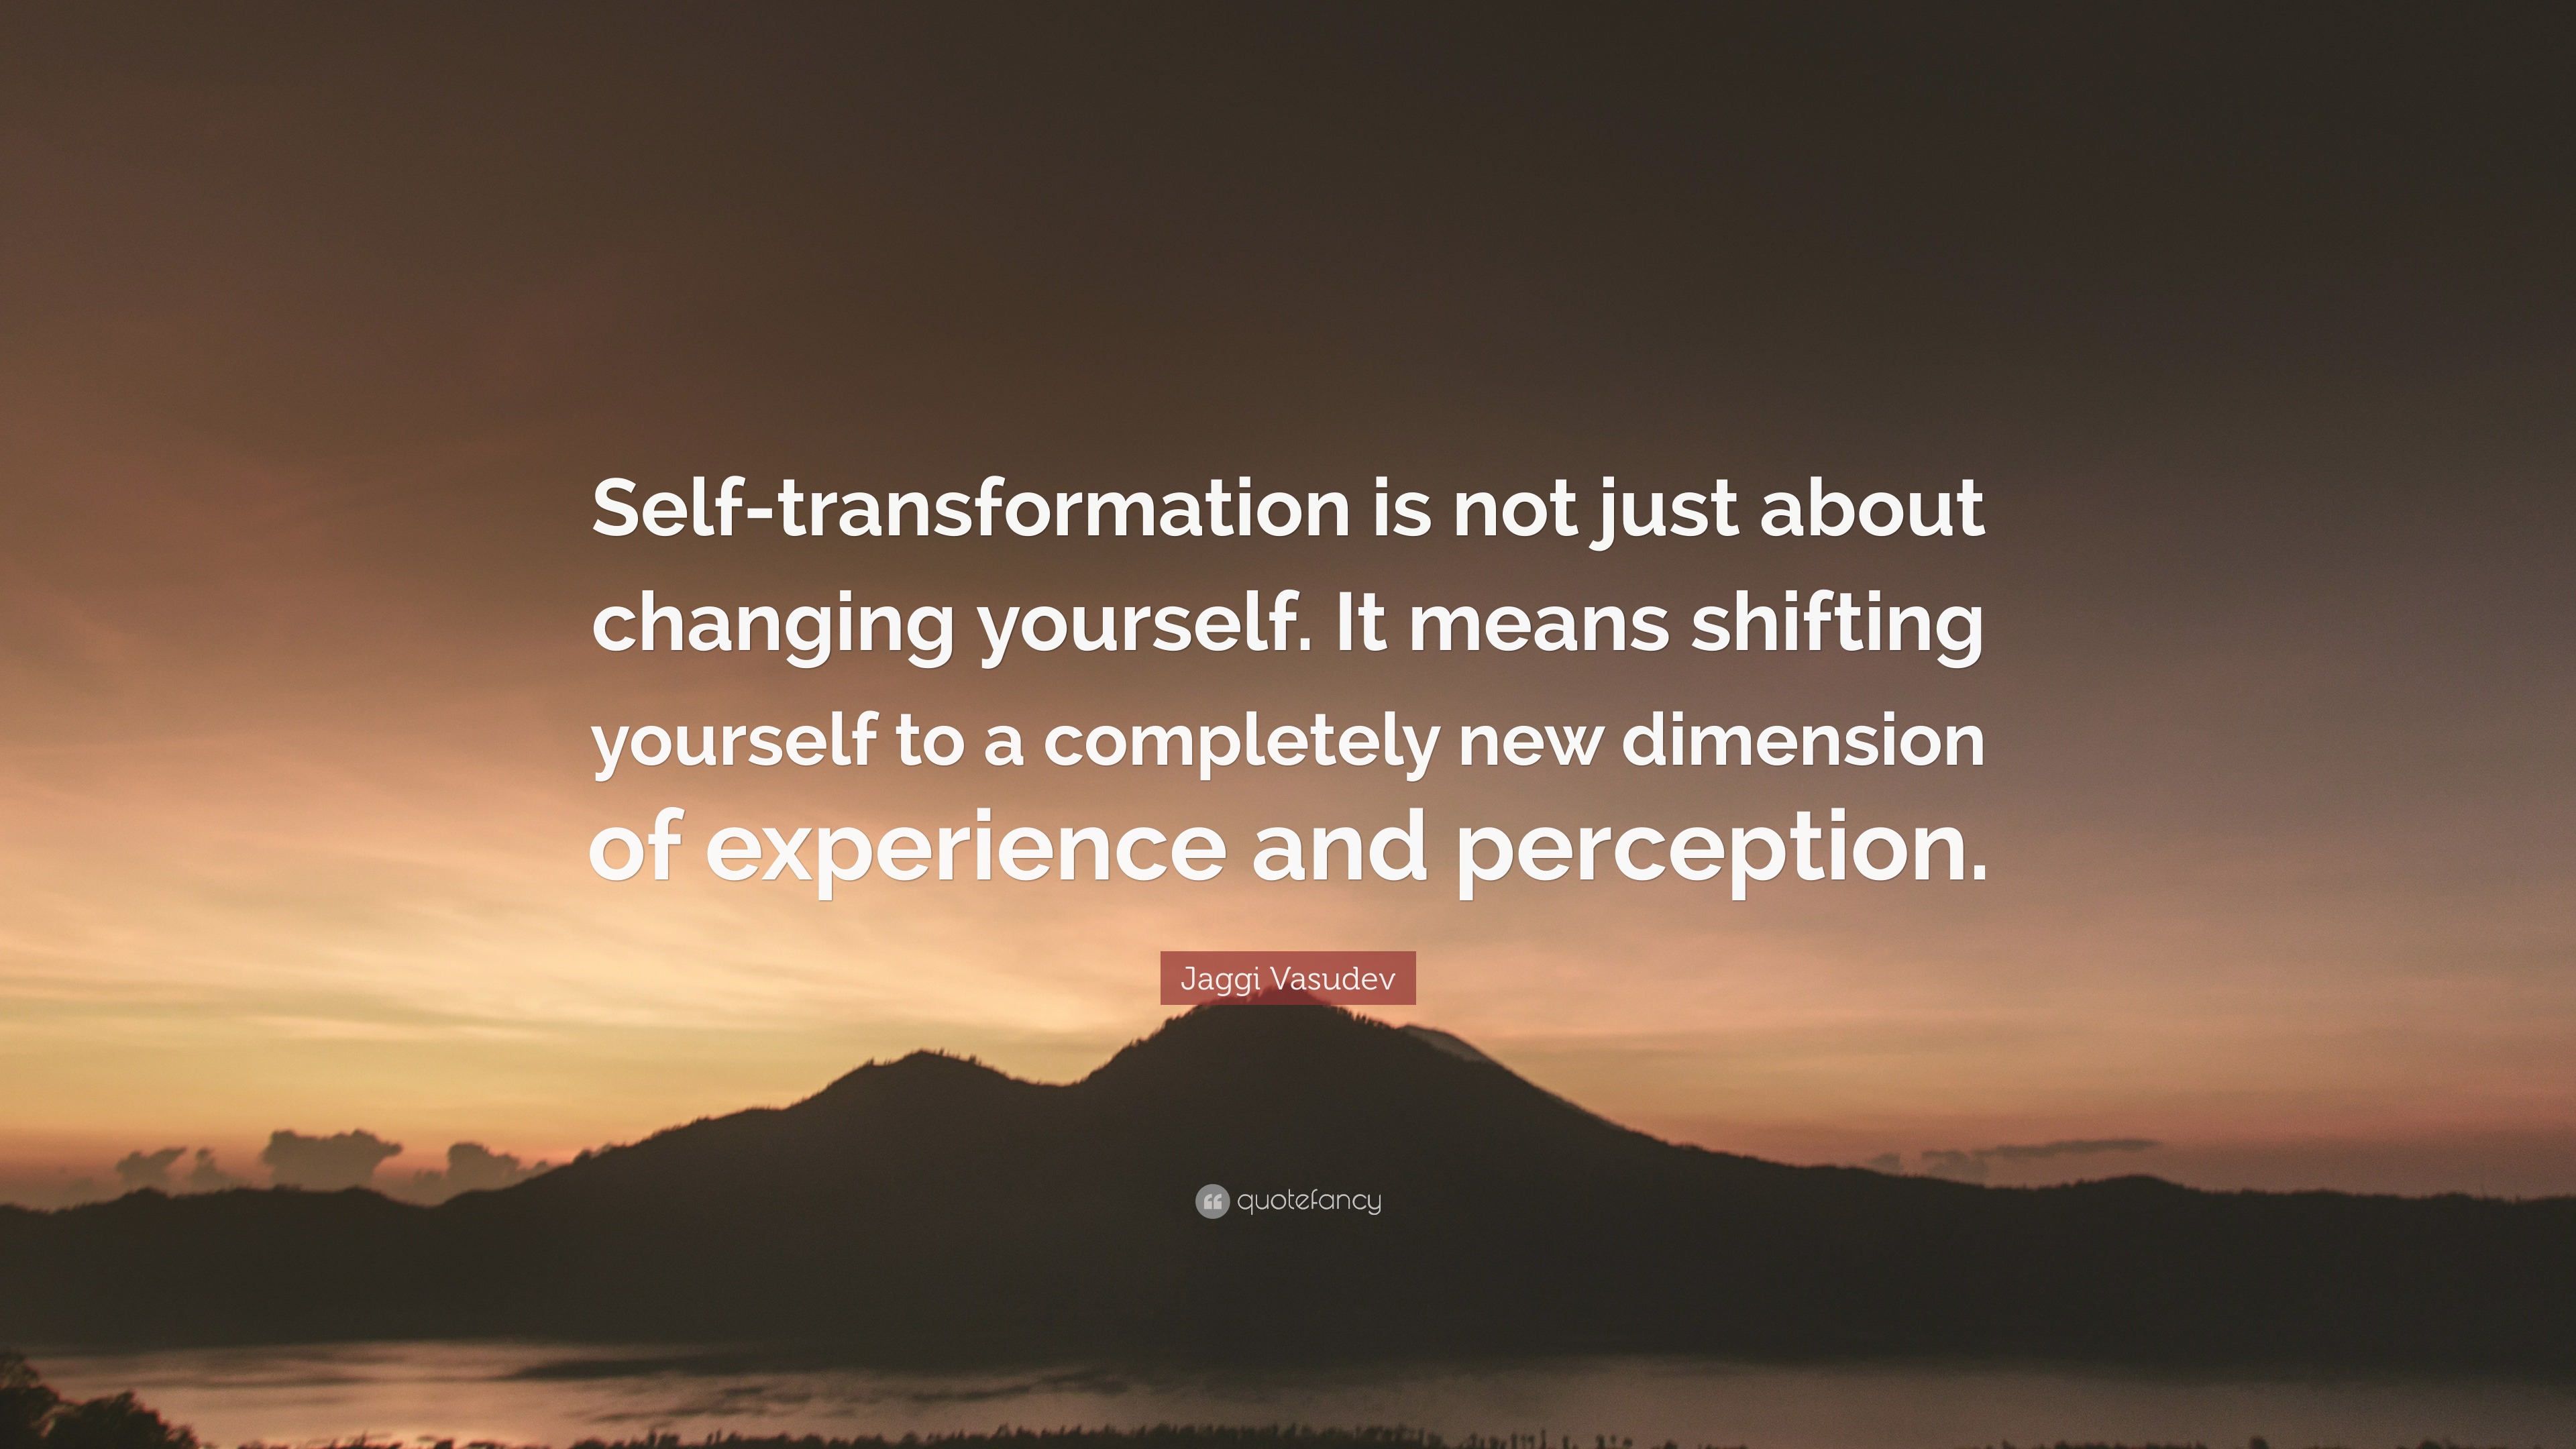 Jaggi Vasudev Quote: “Self-transformation is not just about changing